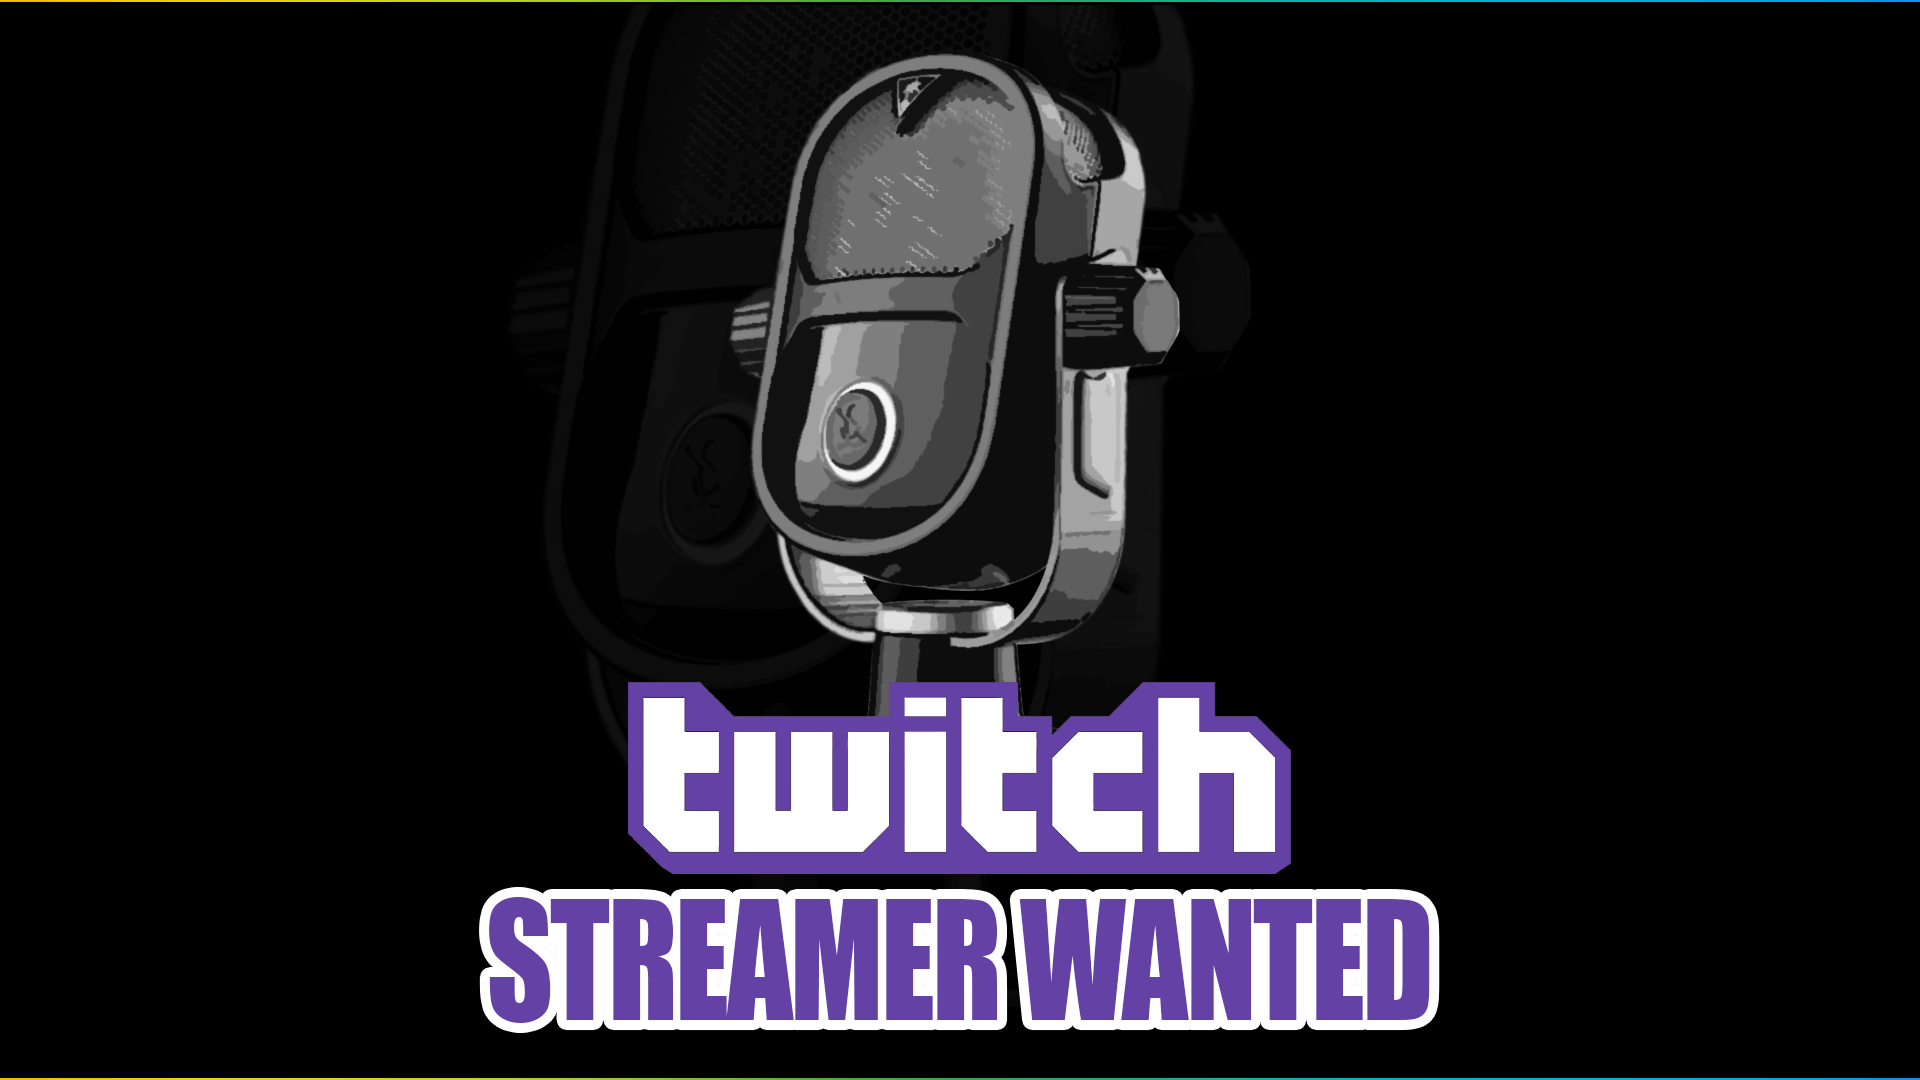 Twitch Streamer Logo - We're looking for Twitch Streamers | ProPokerBacking